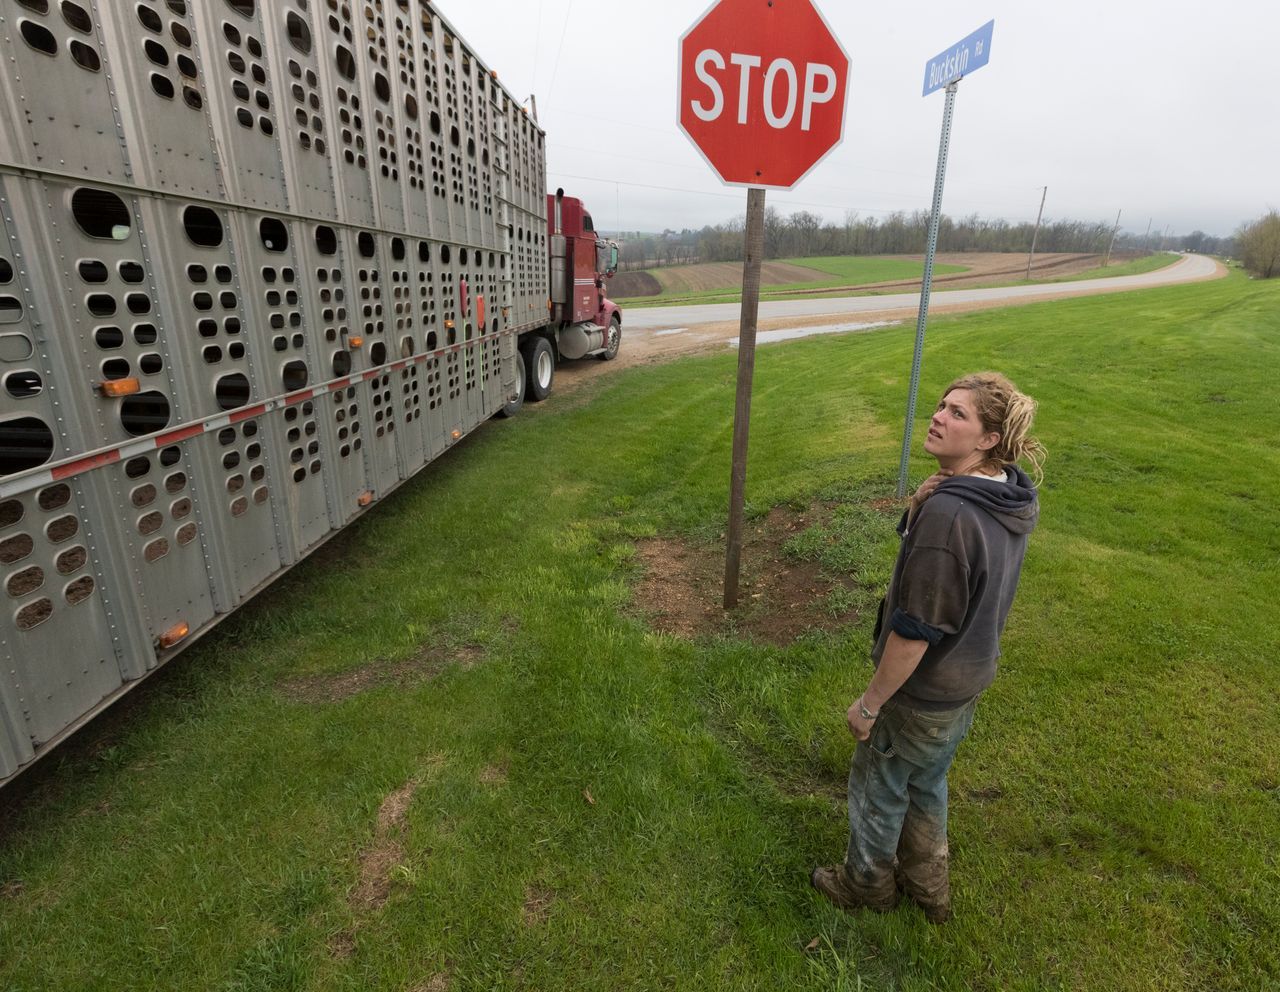 Emily Harris takes a final look at most of her herd as the truck leaves to carry the herd to new farms. Emily and her wife, Brandi Harris, sold their cows and gave up dairy farming. Image by Mark Hoffman. United States, 2019.